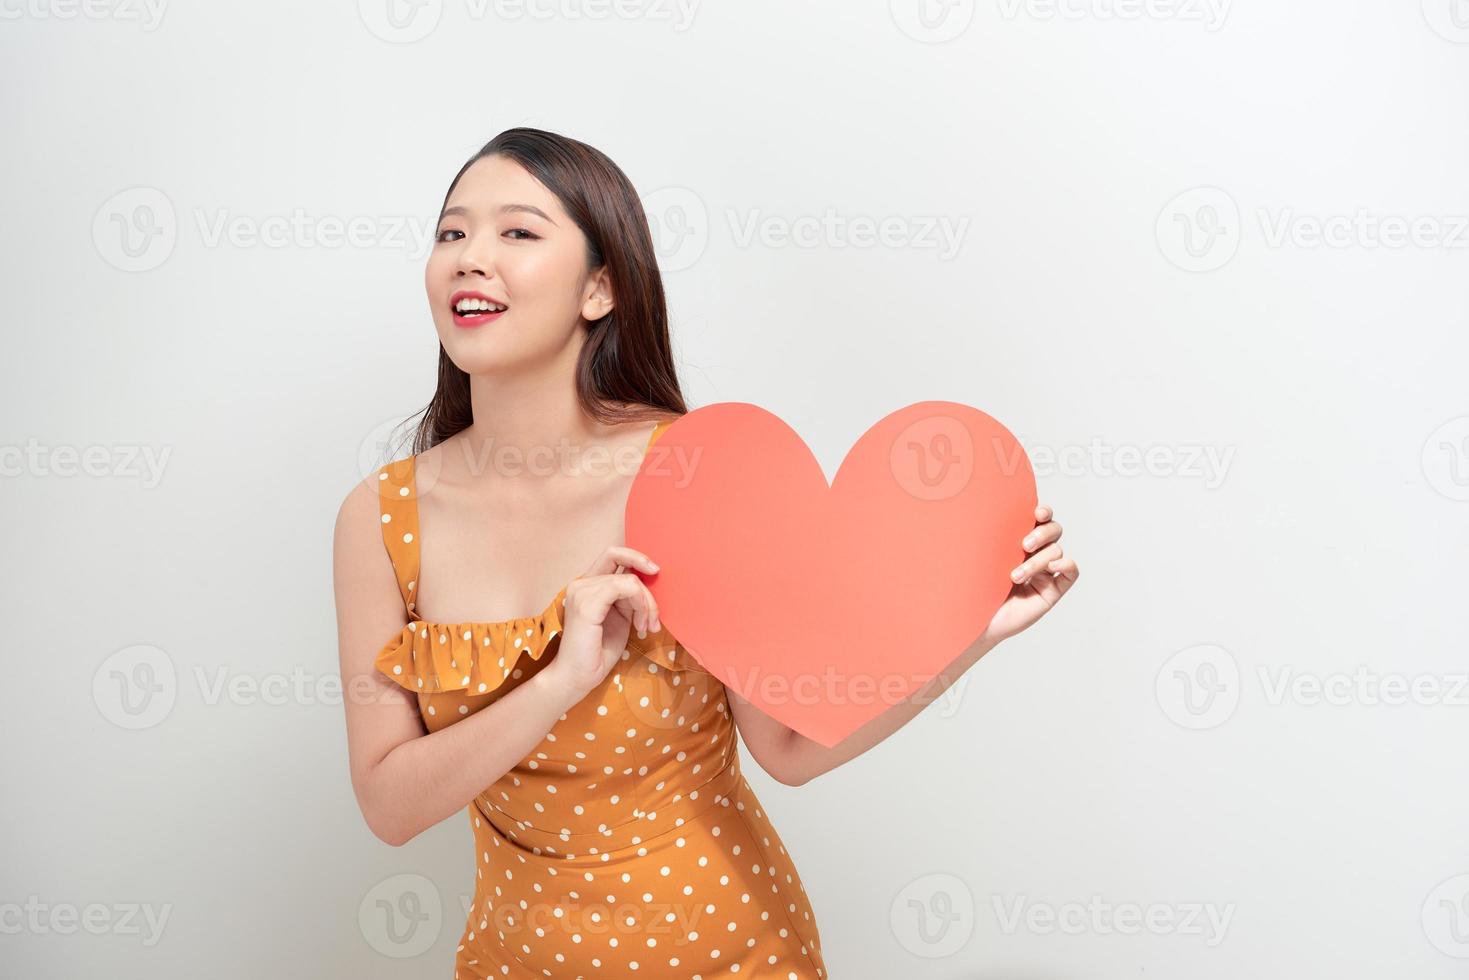 Love and valentines day. Sexy woman in polka dot dress holding heart smiling cute and adorable photo